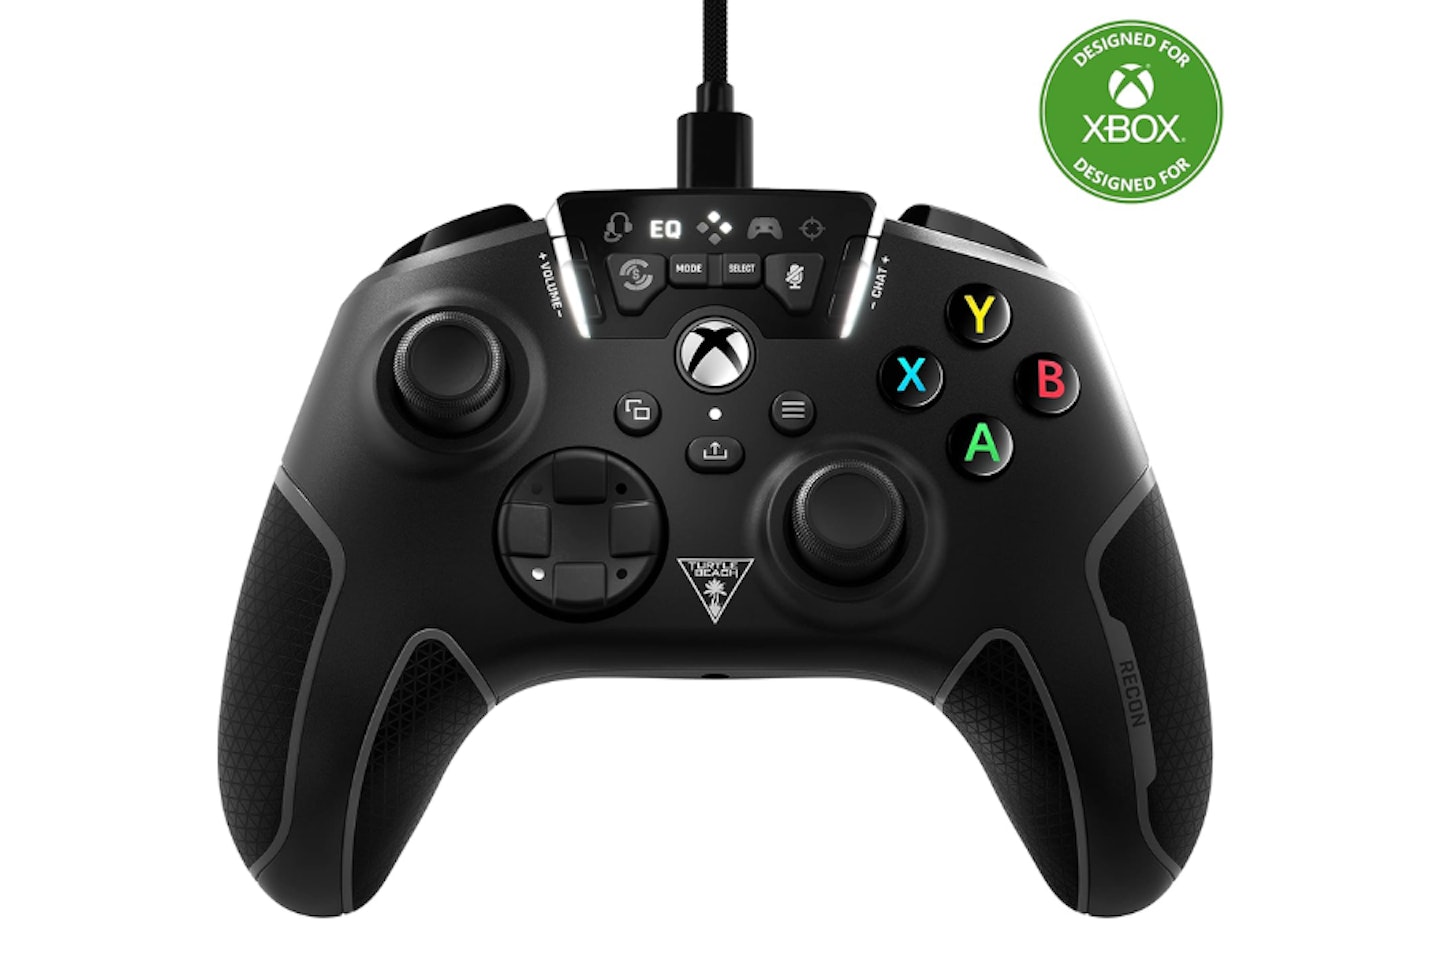 Turtle Beach Recon Controller Black - one of the best PC gaming accessories